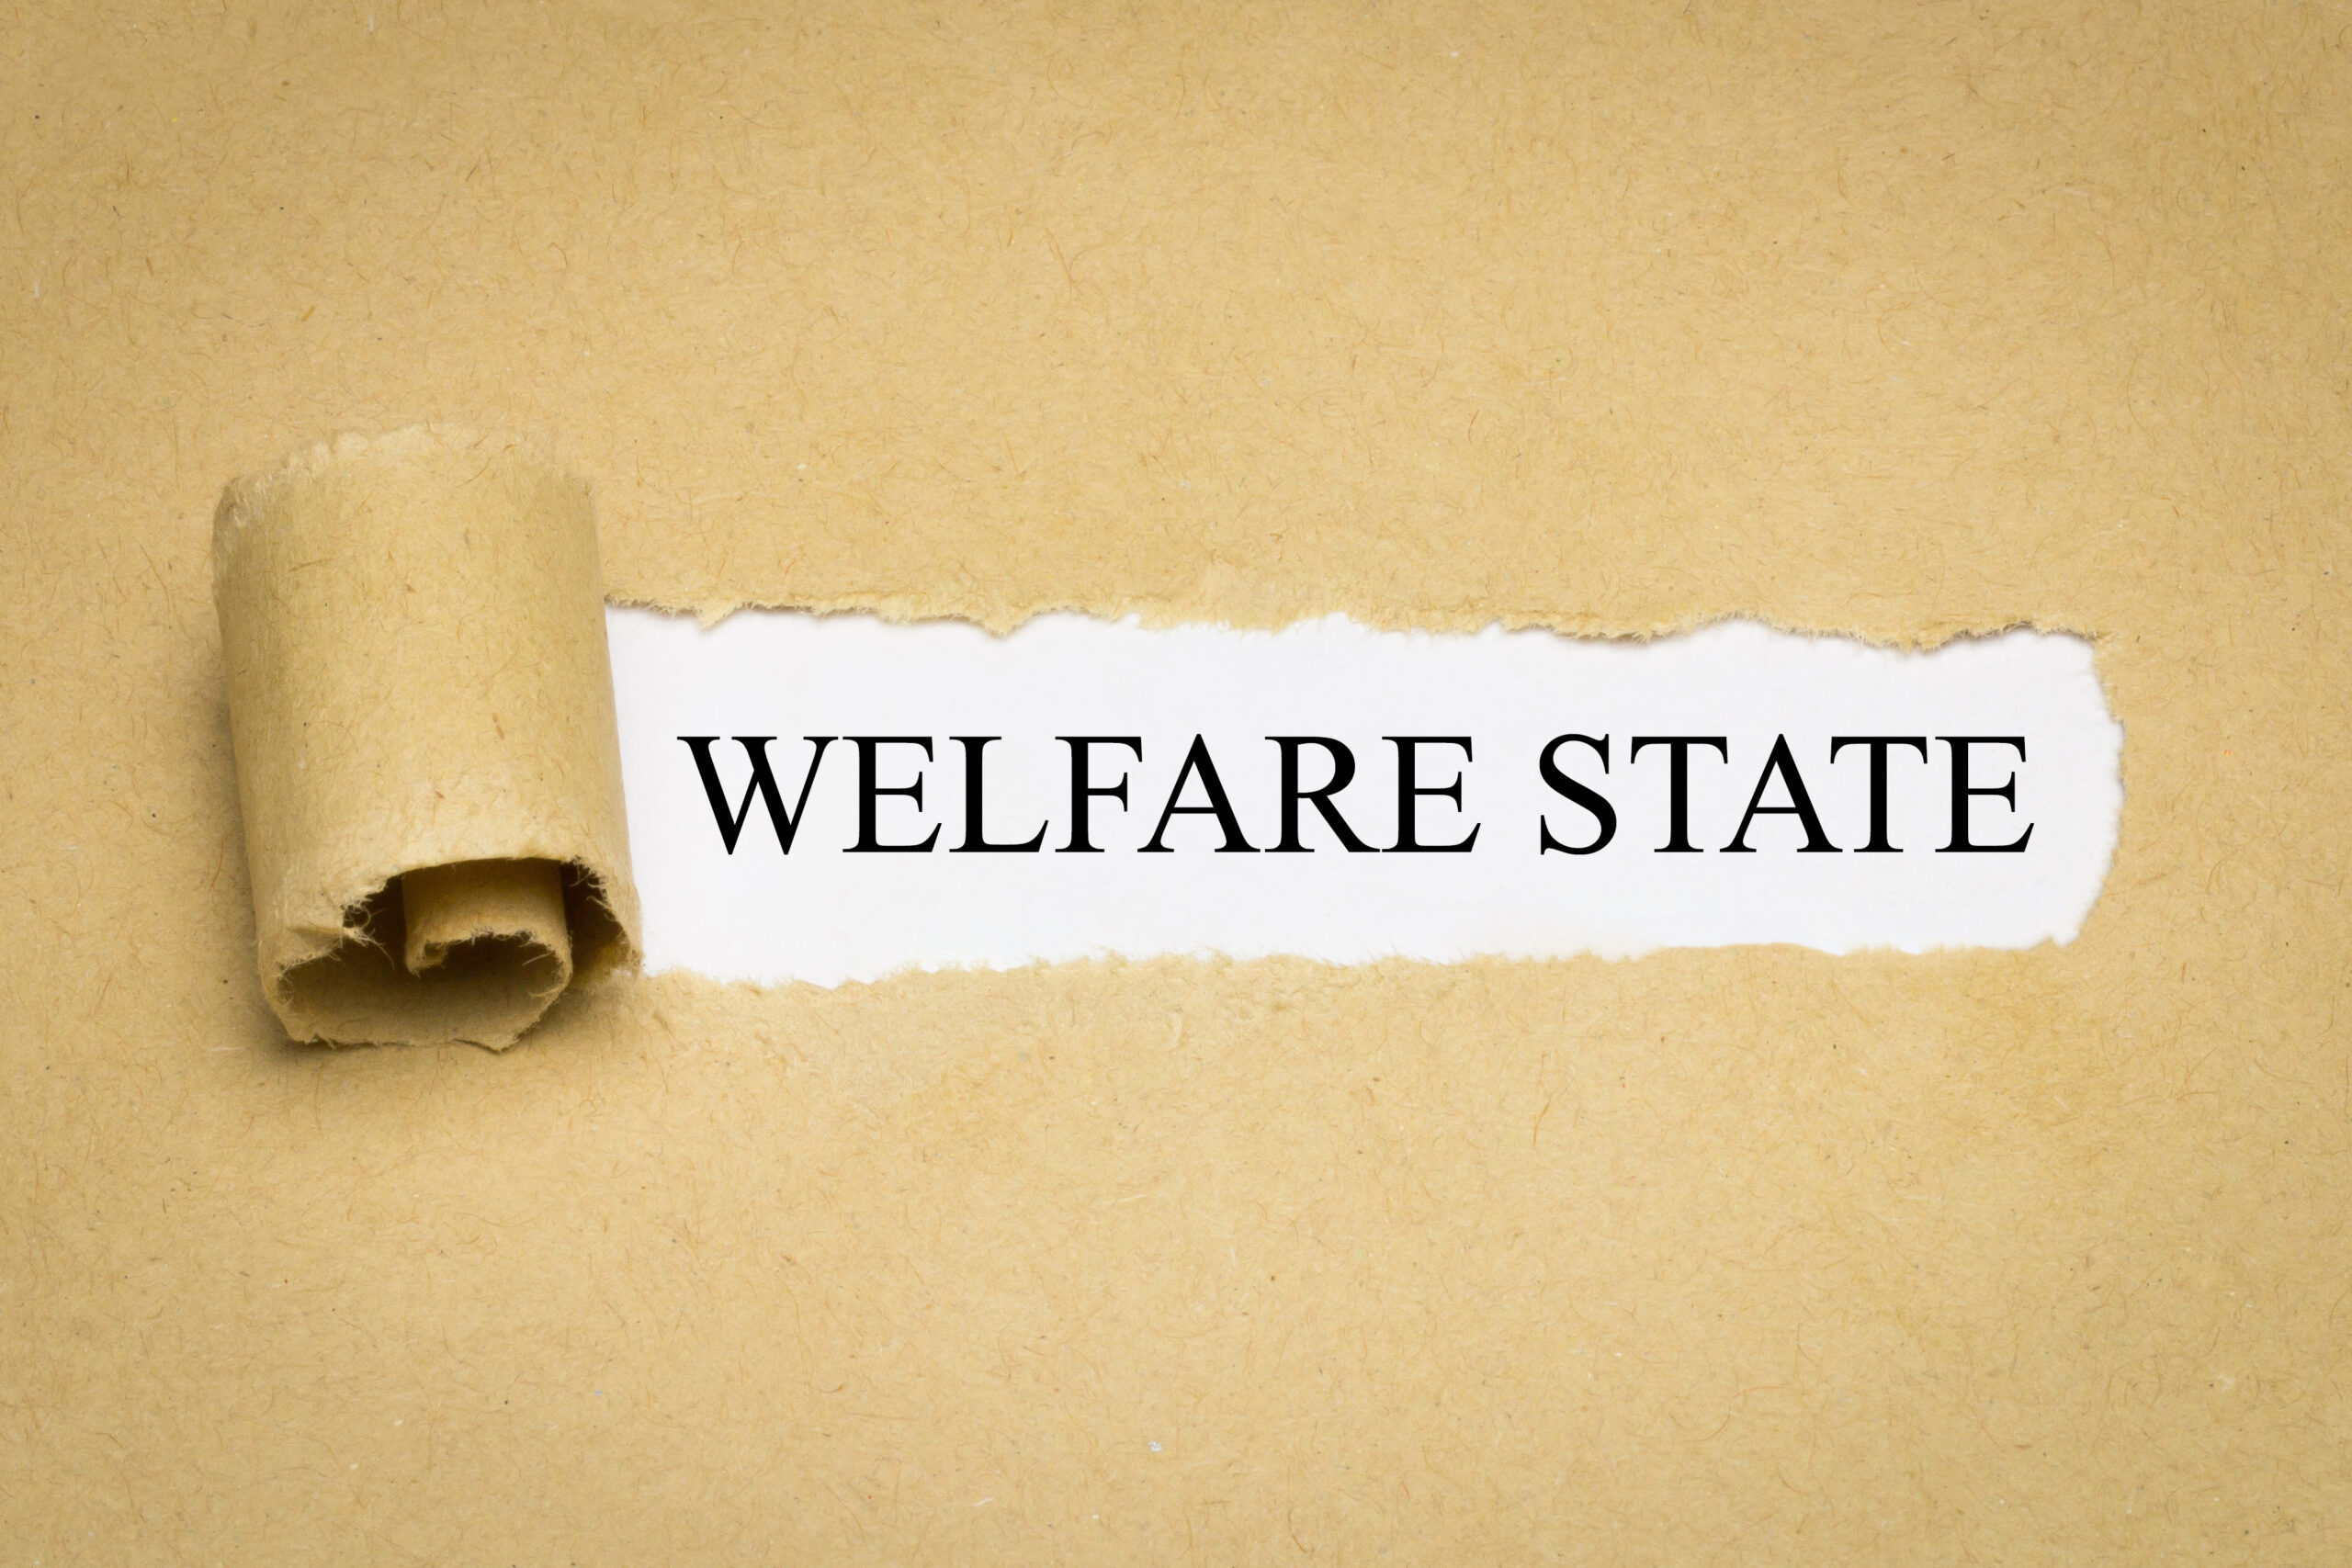 STOP The Dems’ Welfare State 😵